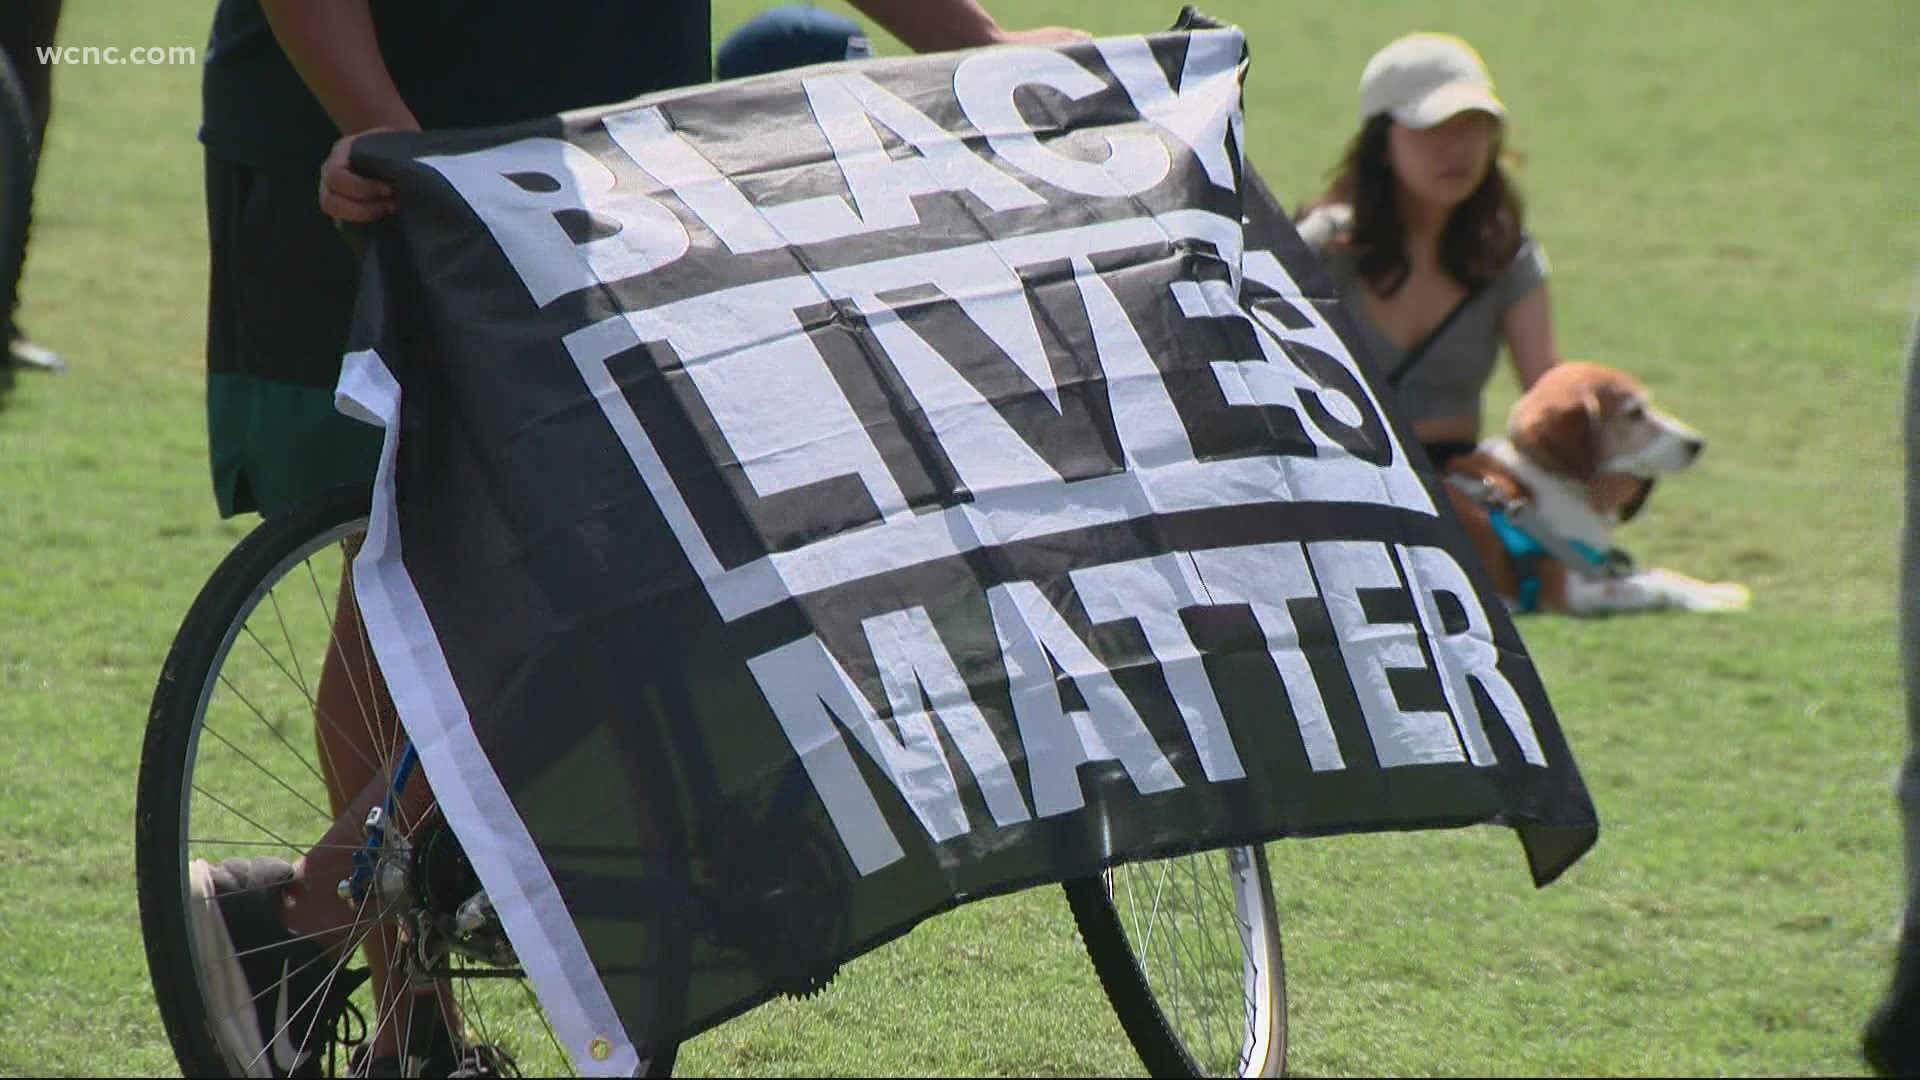 The peaceful protest was Sunday in Uptown to honor Jacob Blake, Jr.